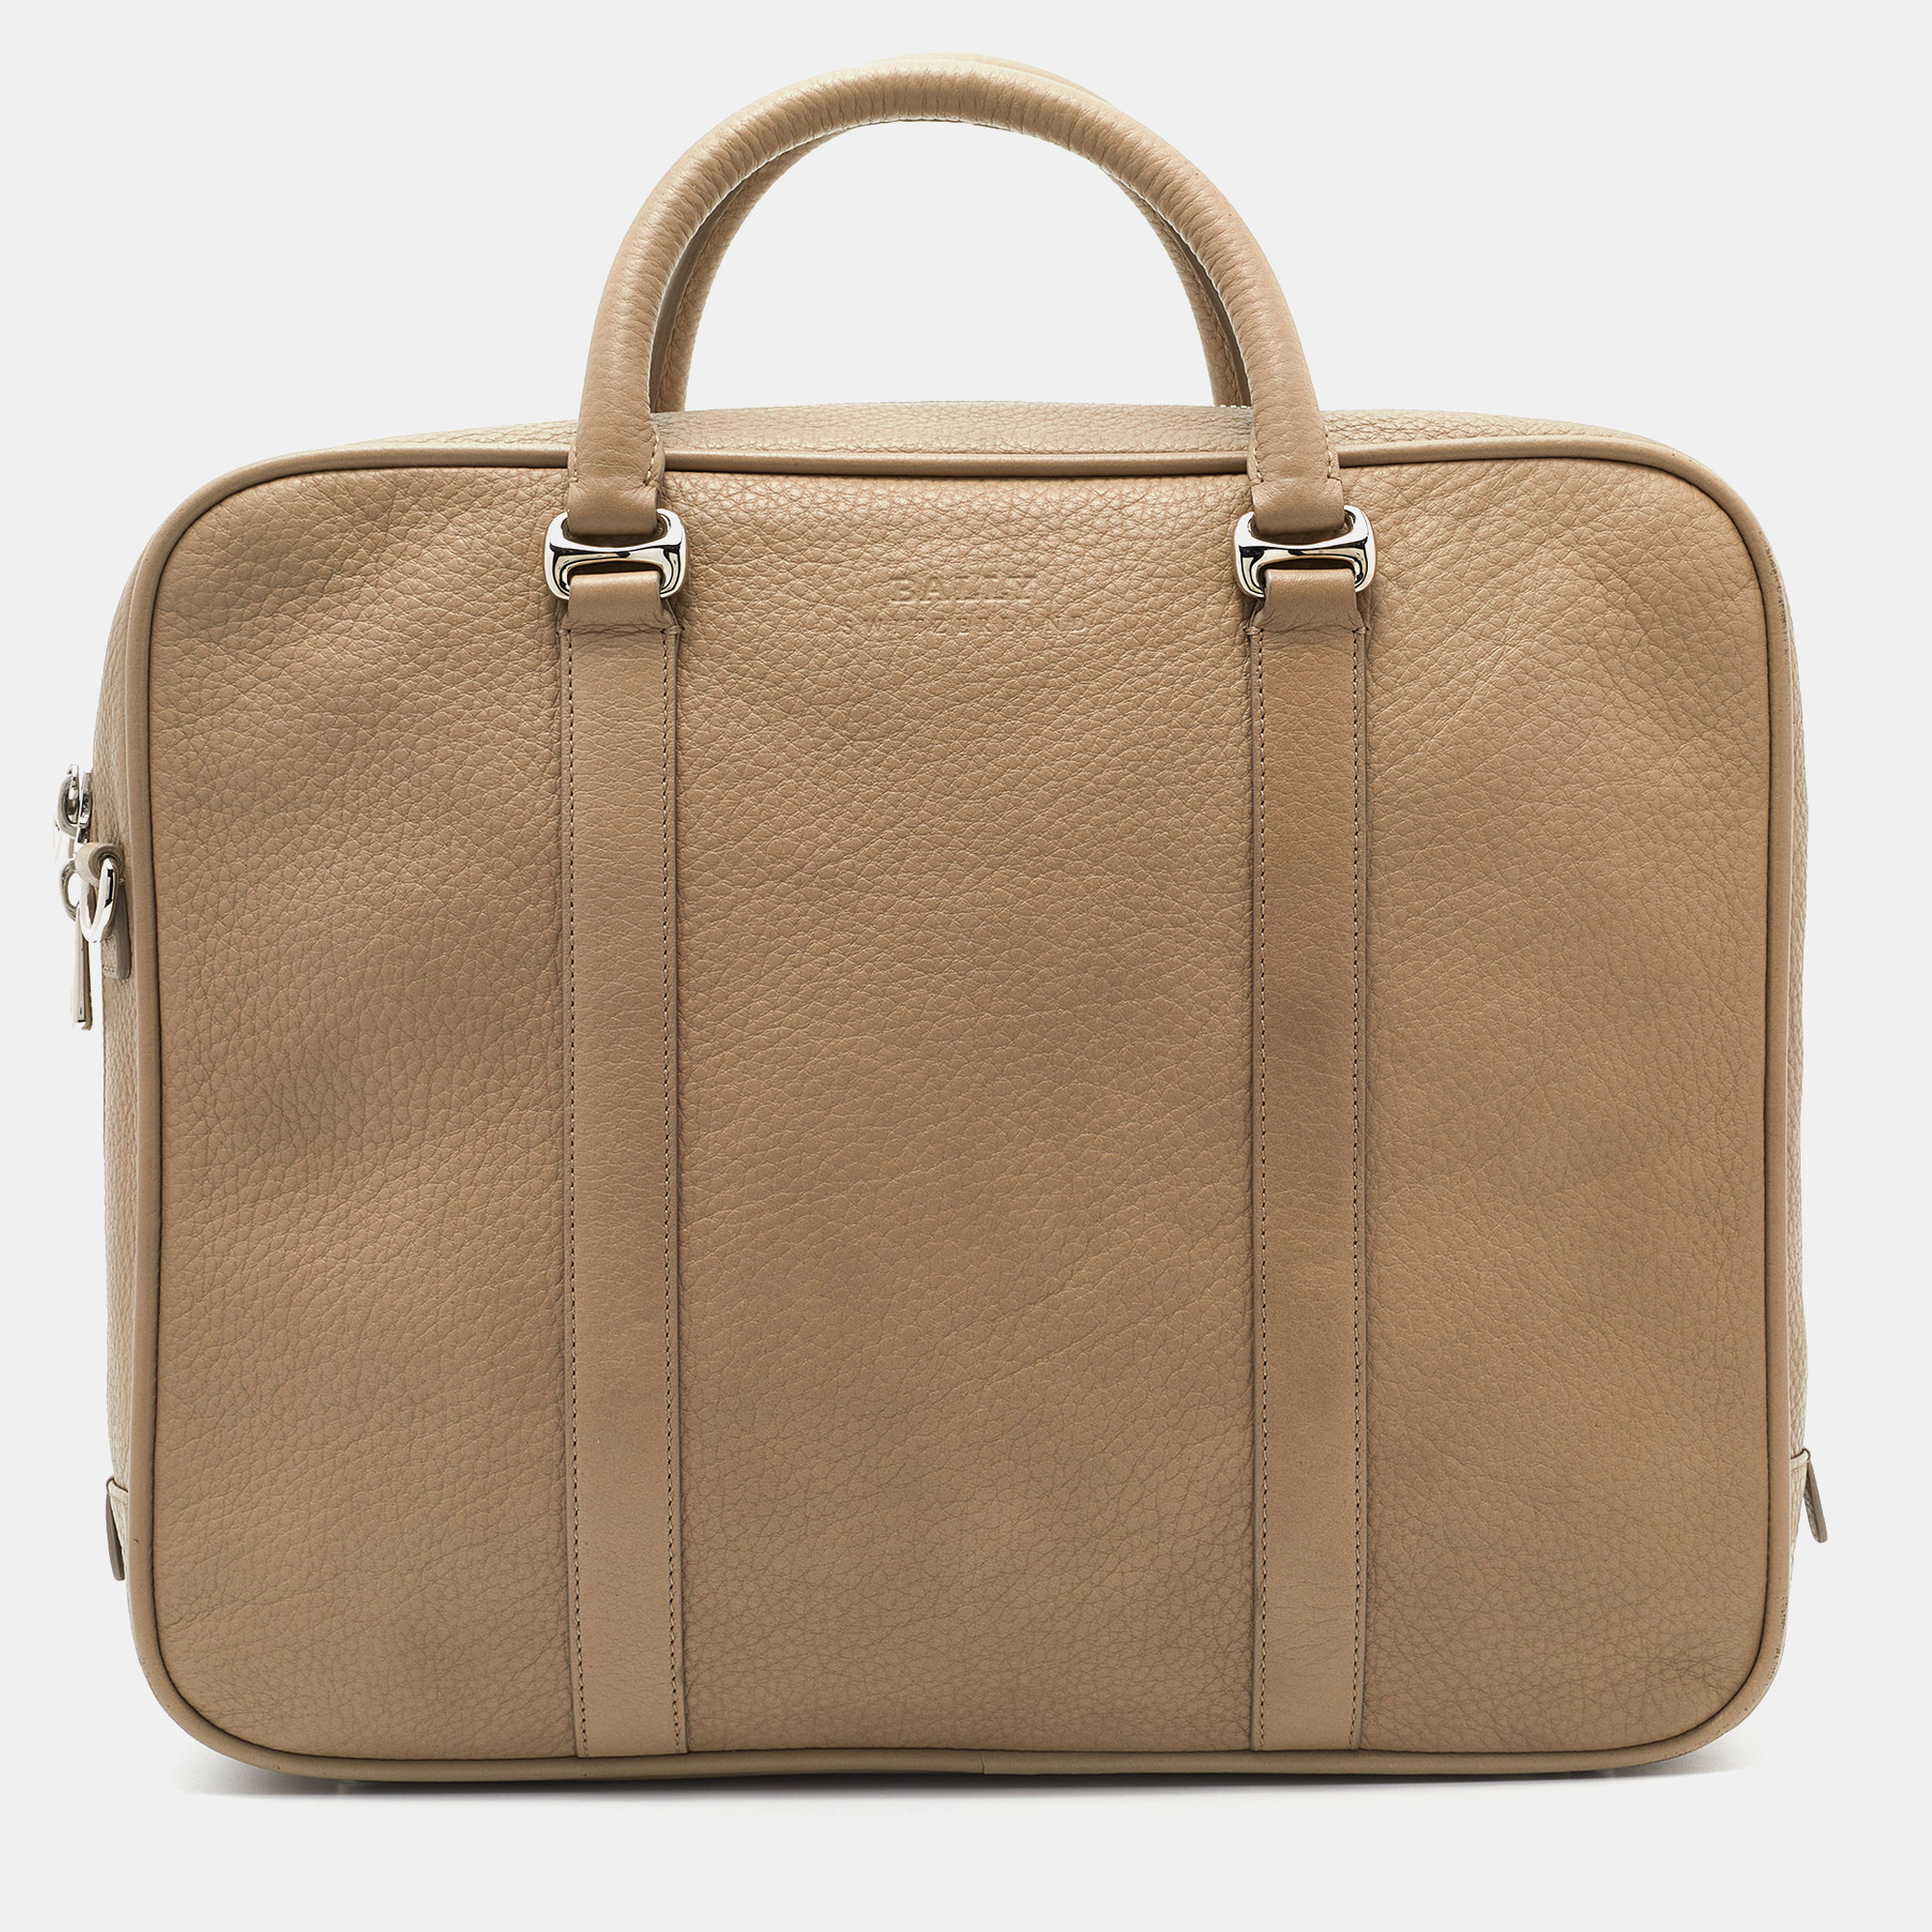 Pre-owned Bally Beige Leather Maed Laptop Bag